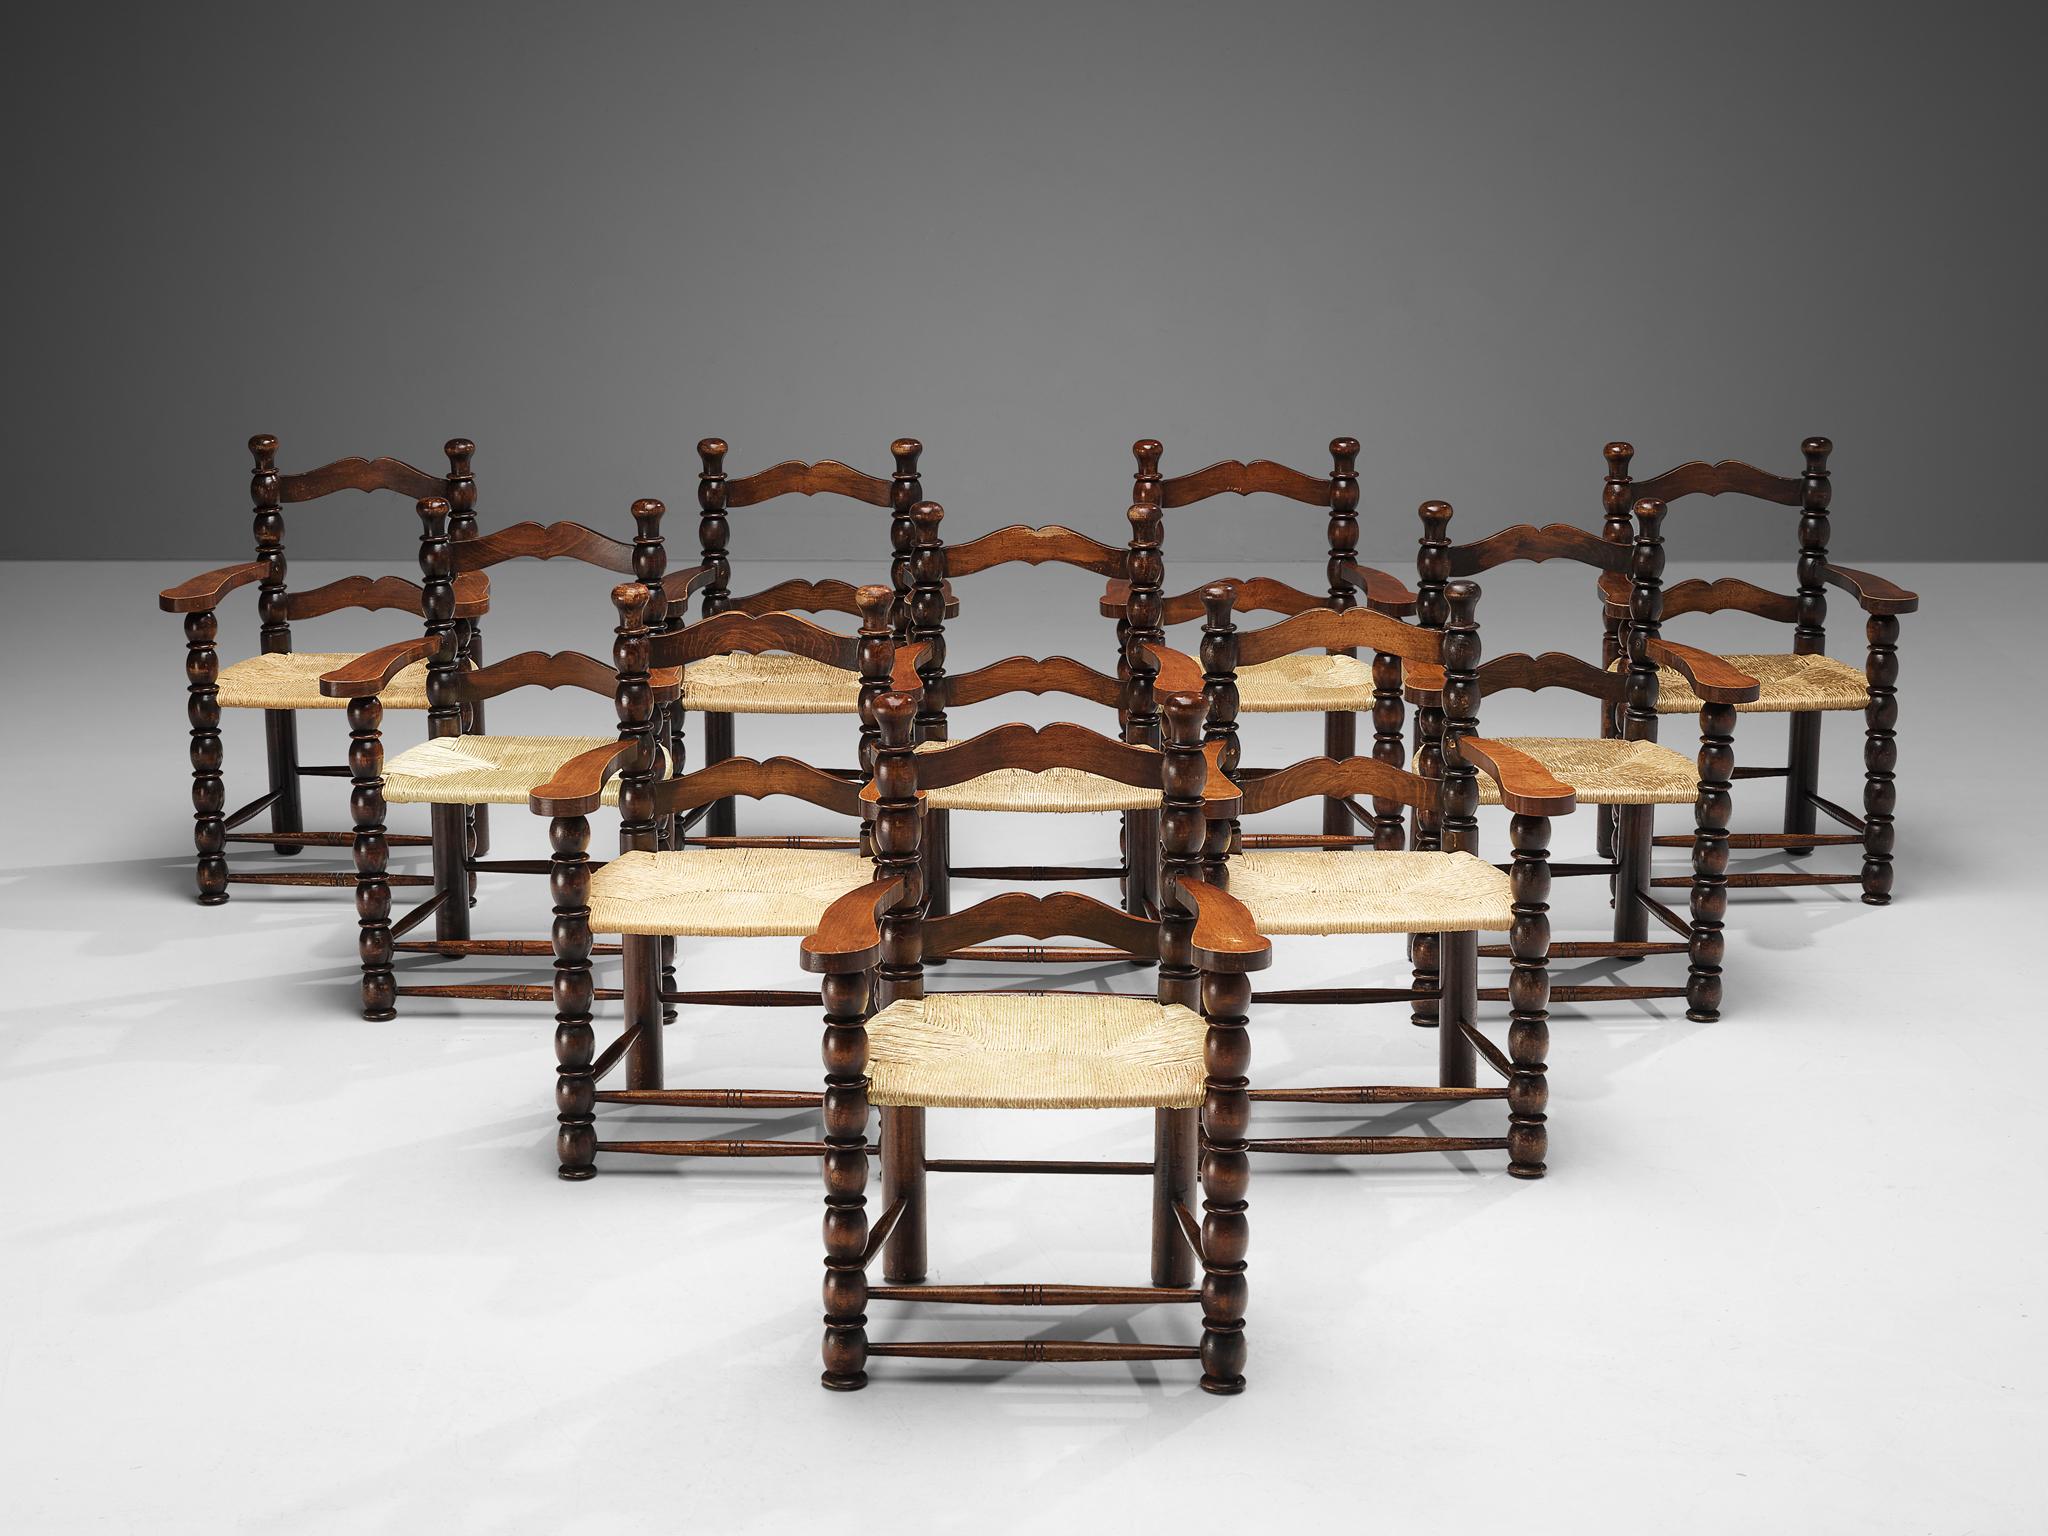 Armchairs, stained wood, straw, France, 1940s.

Decorative set of French armchairs. The stained wooden frame has multiple carved details that add up to a complex whole. Carved lines and circular ends, straight and round parts come together to form a